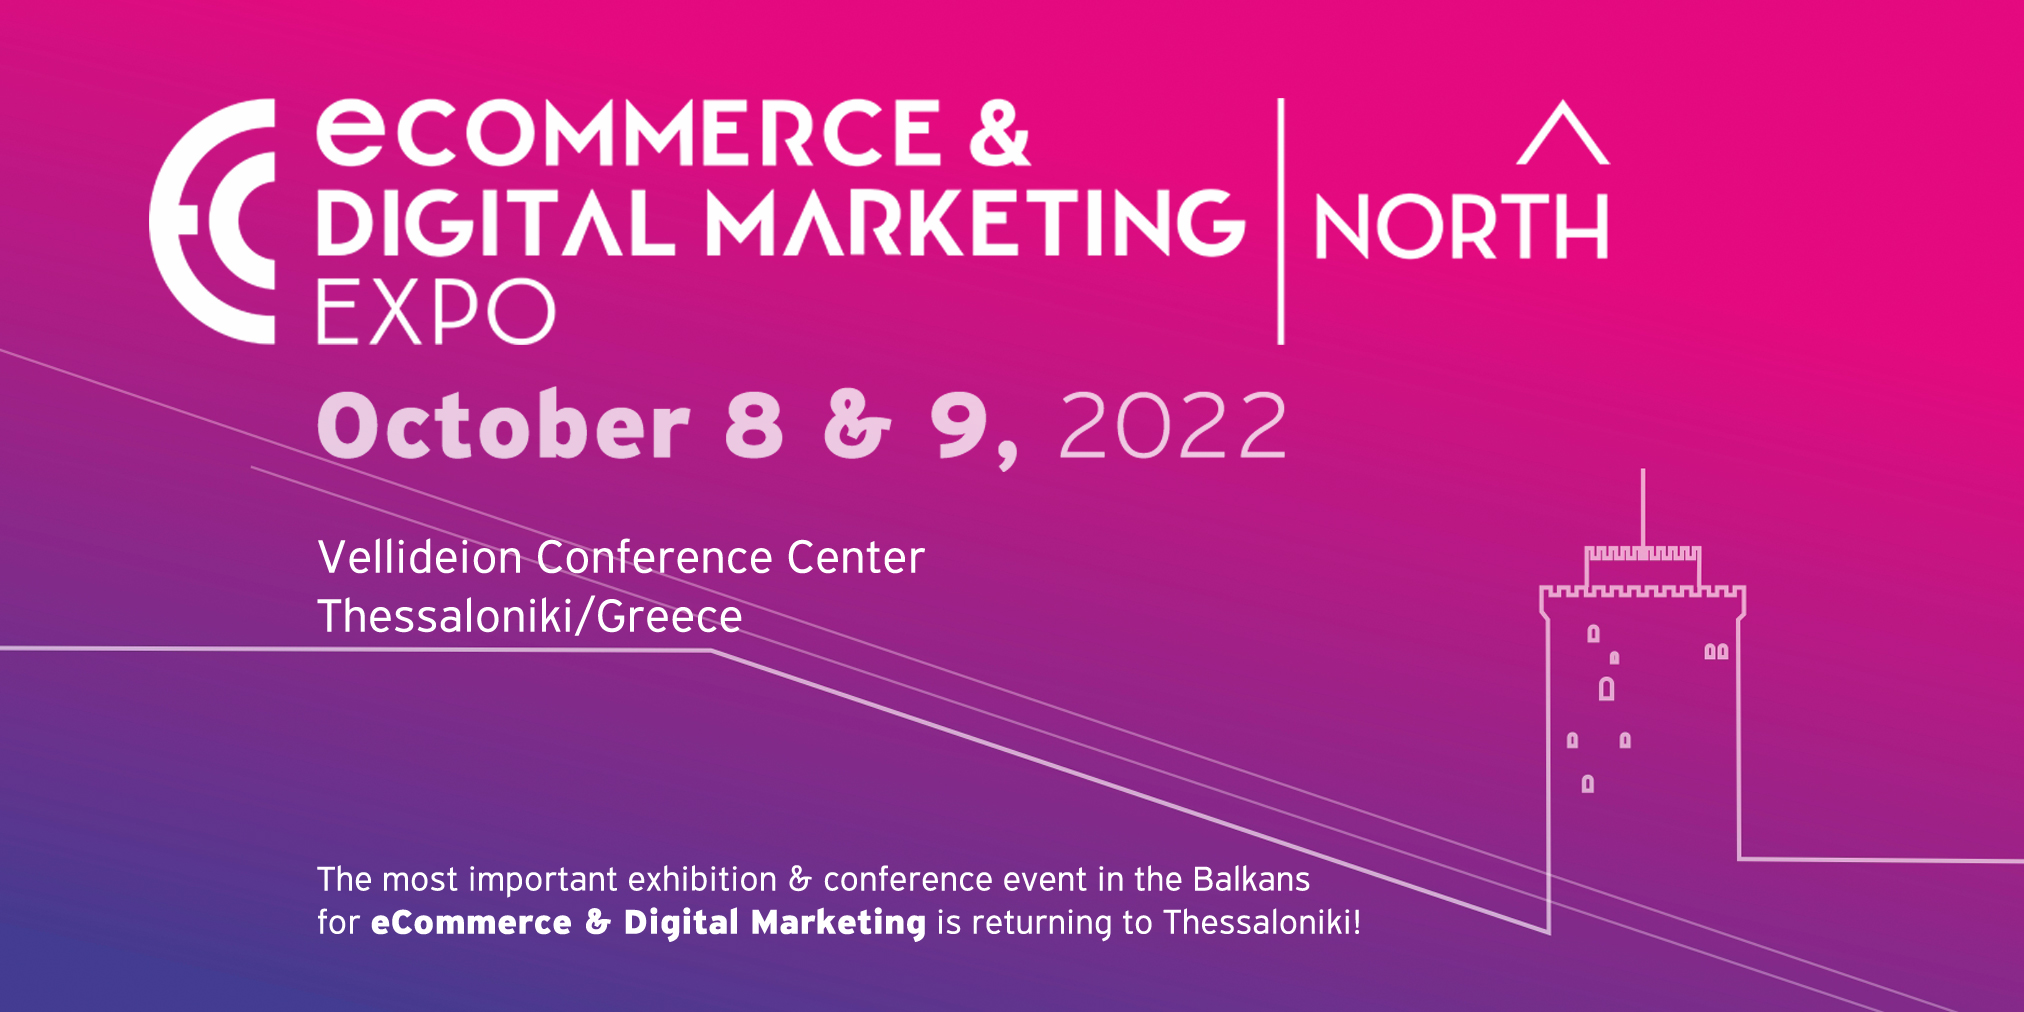 eCommerce and Digital Marketing Expo NORTH 2022